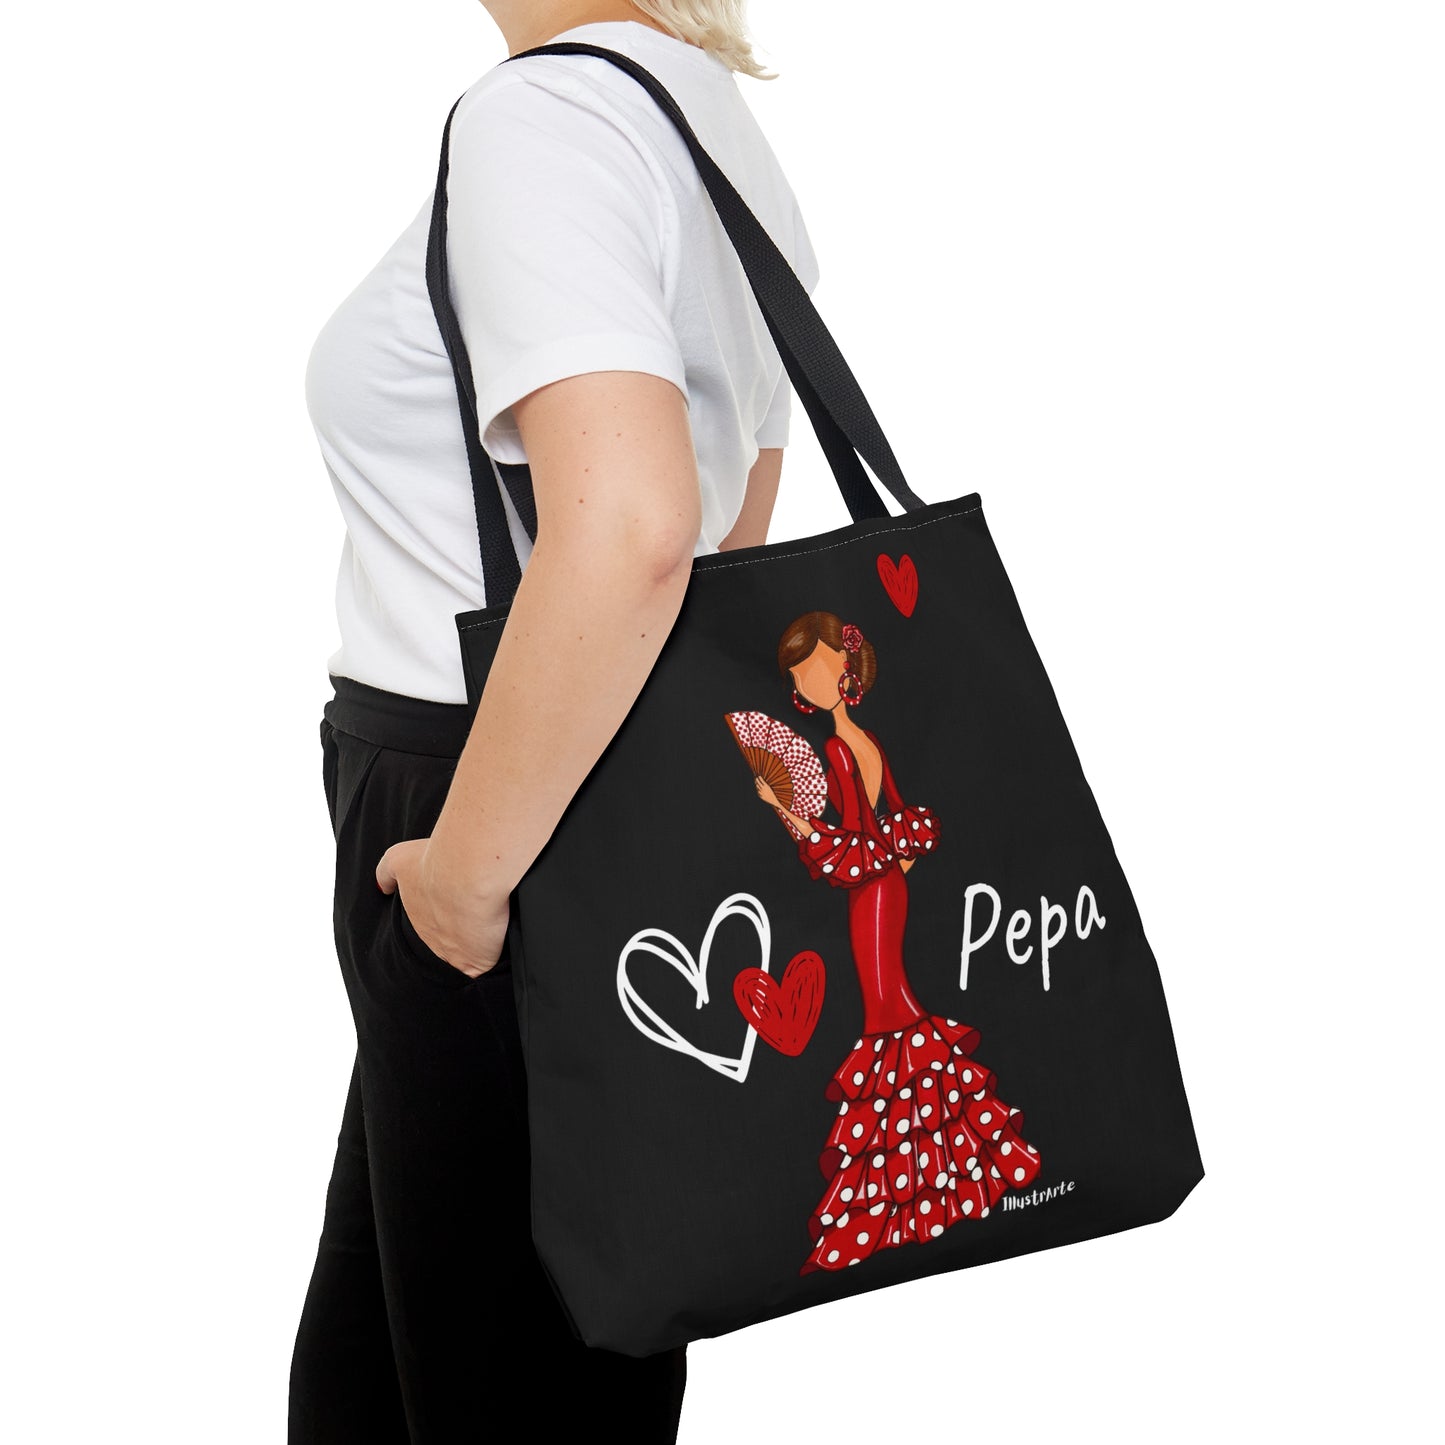 a woman carrying a black bag with a picture of a woman in a red dress